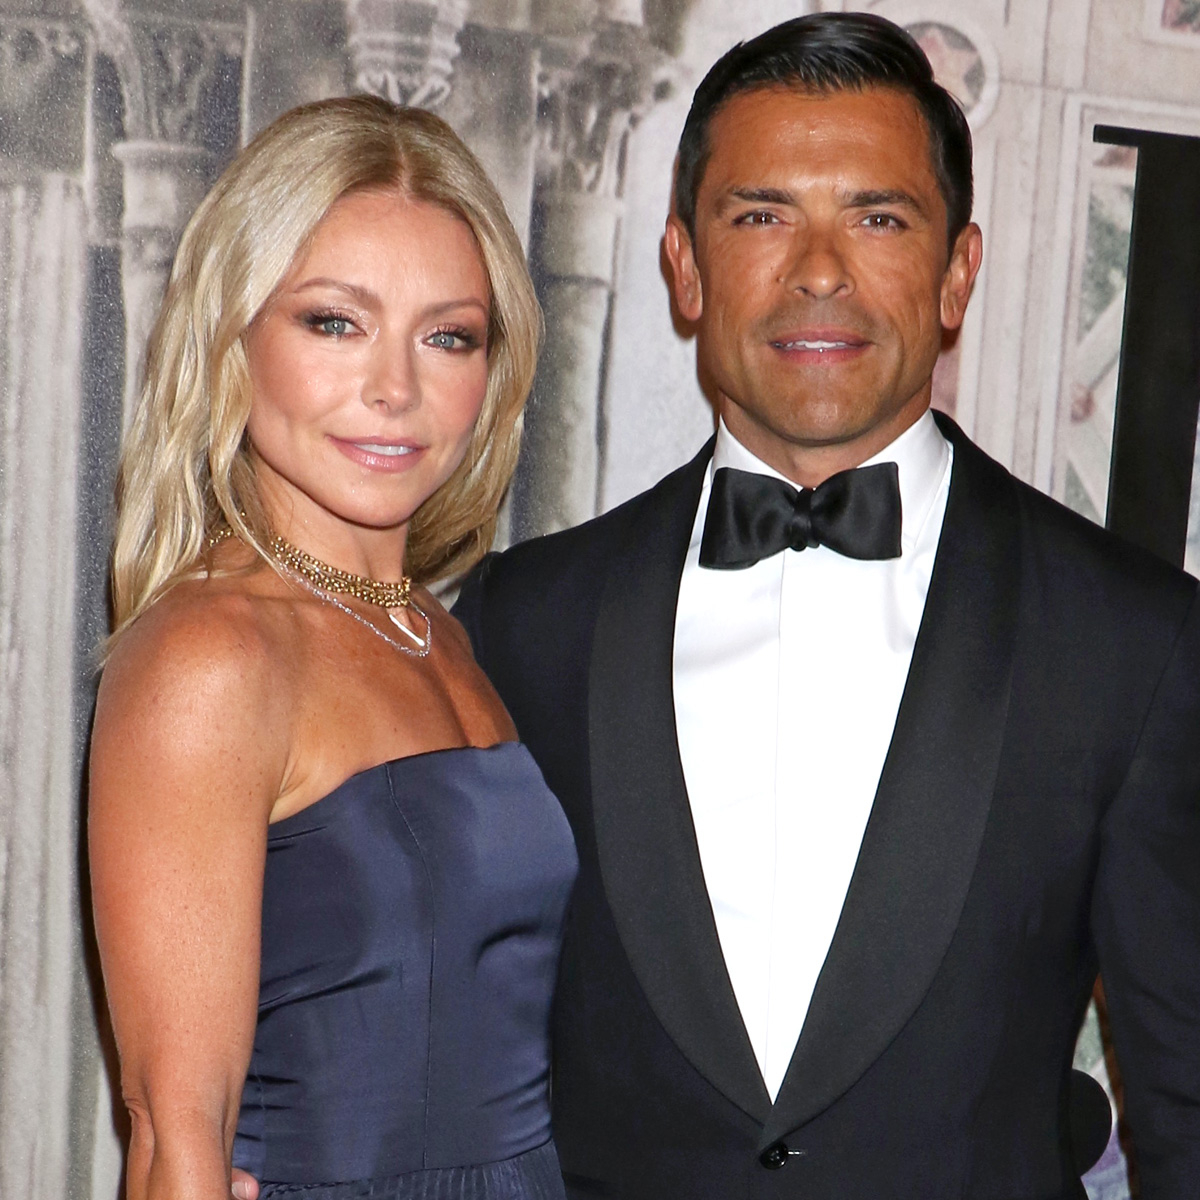 Interracial Xxx Kelly Rippa - Kelly Ripa News, Pictures, and Videos - E! Online